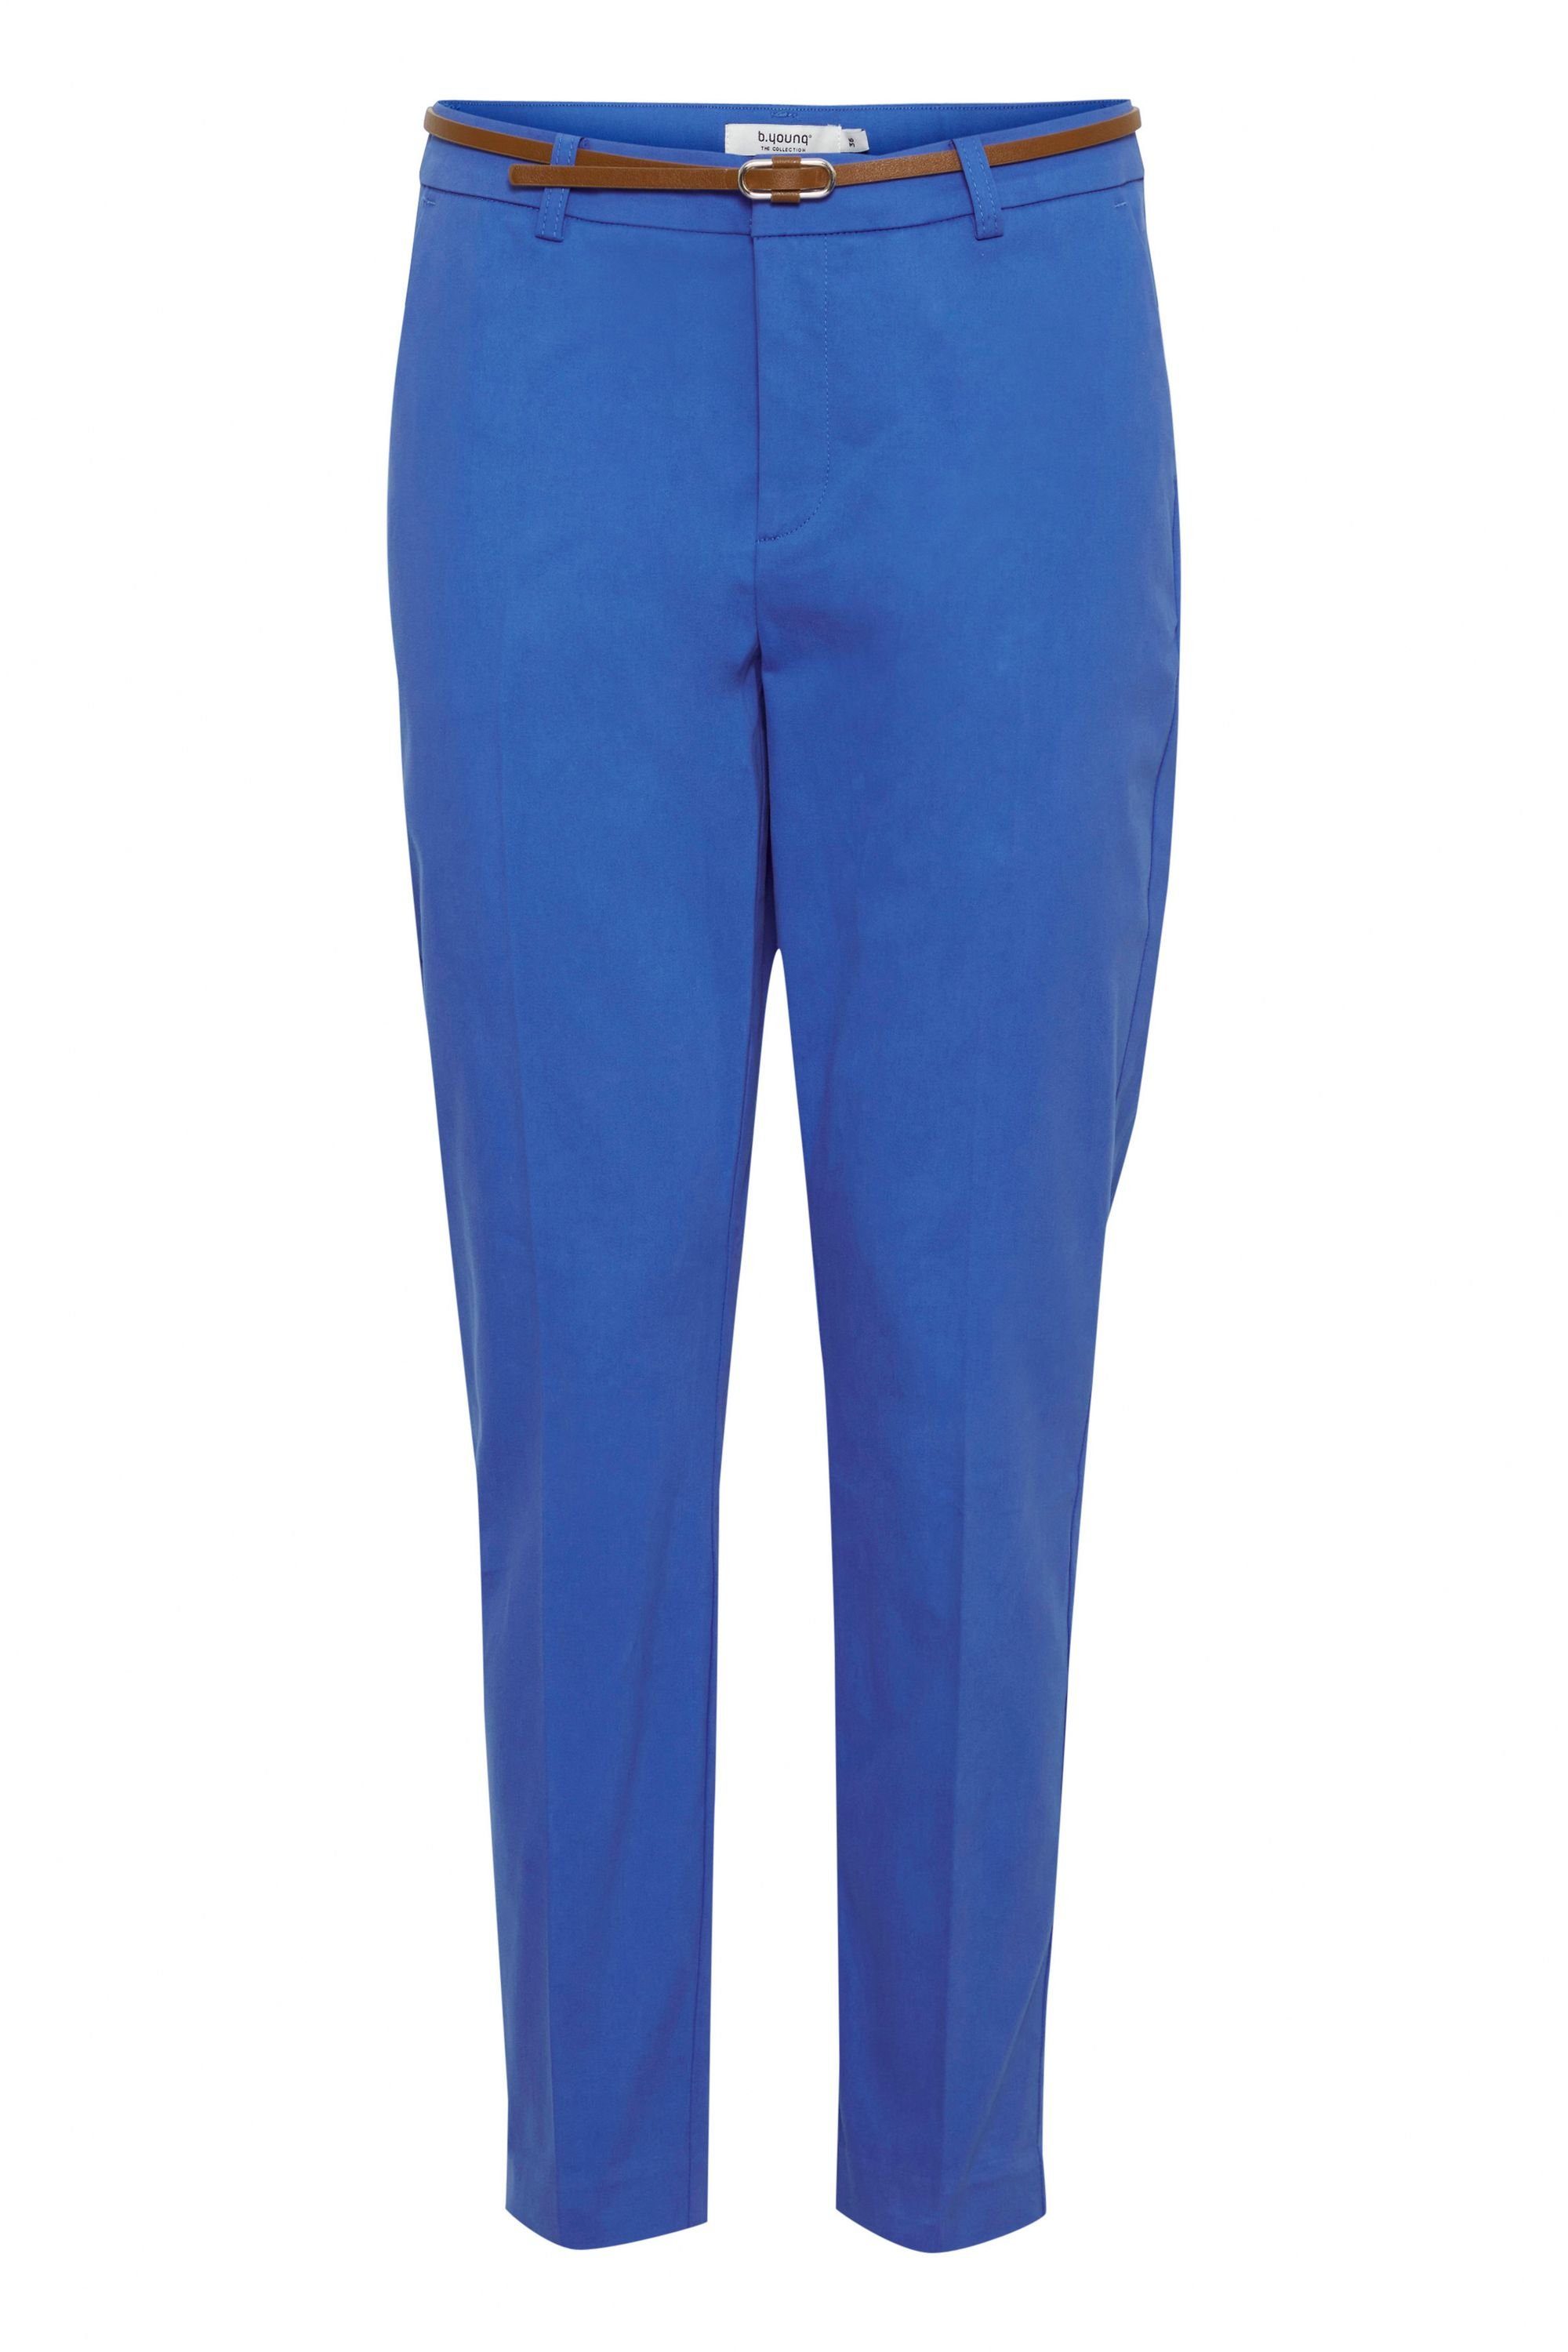 b.young Chinohose BYDays cigaret Blue 2 Strong - (184051) 20803473 pants